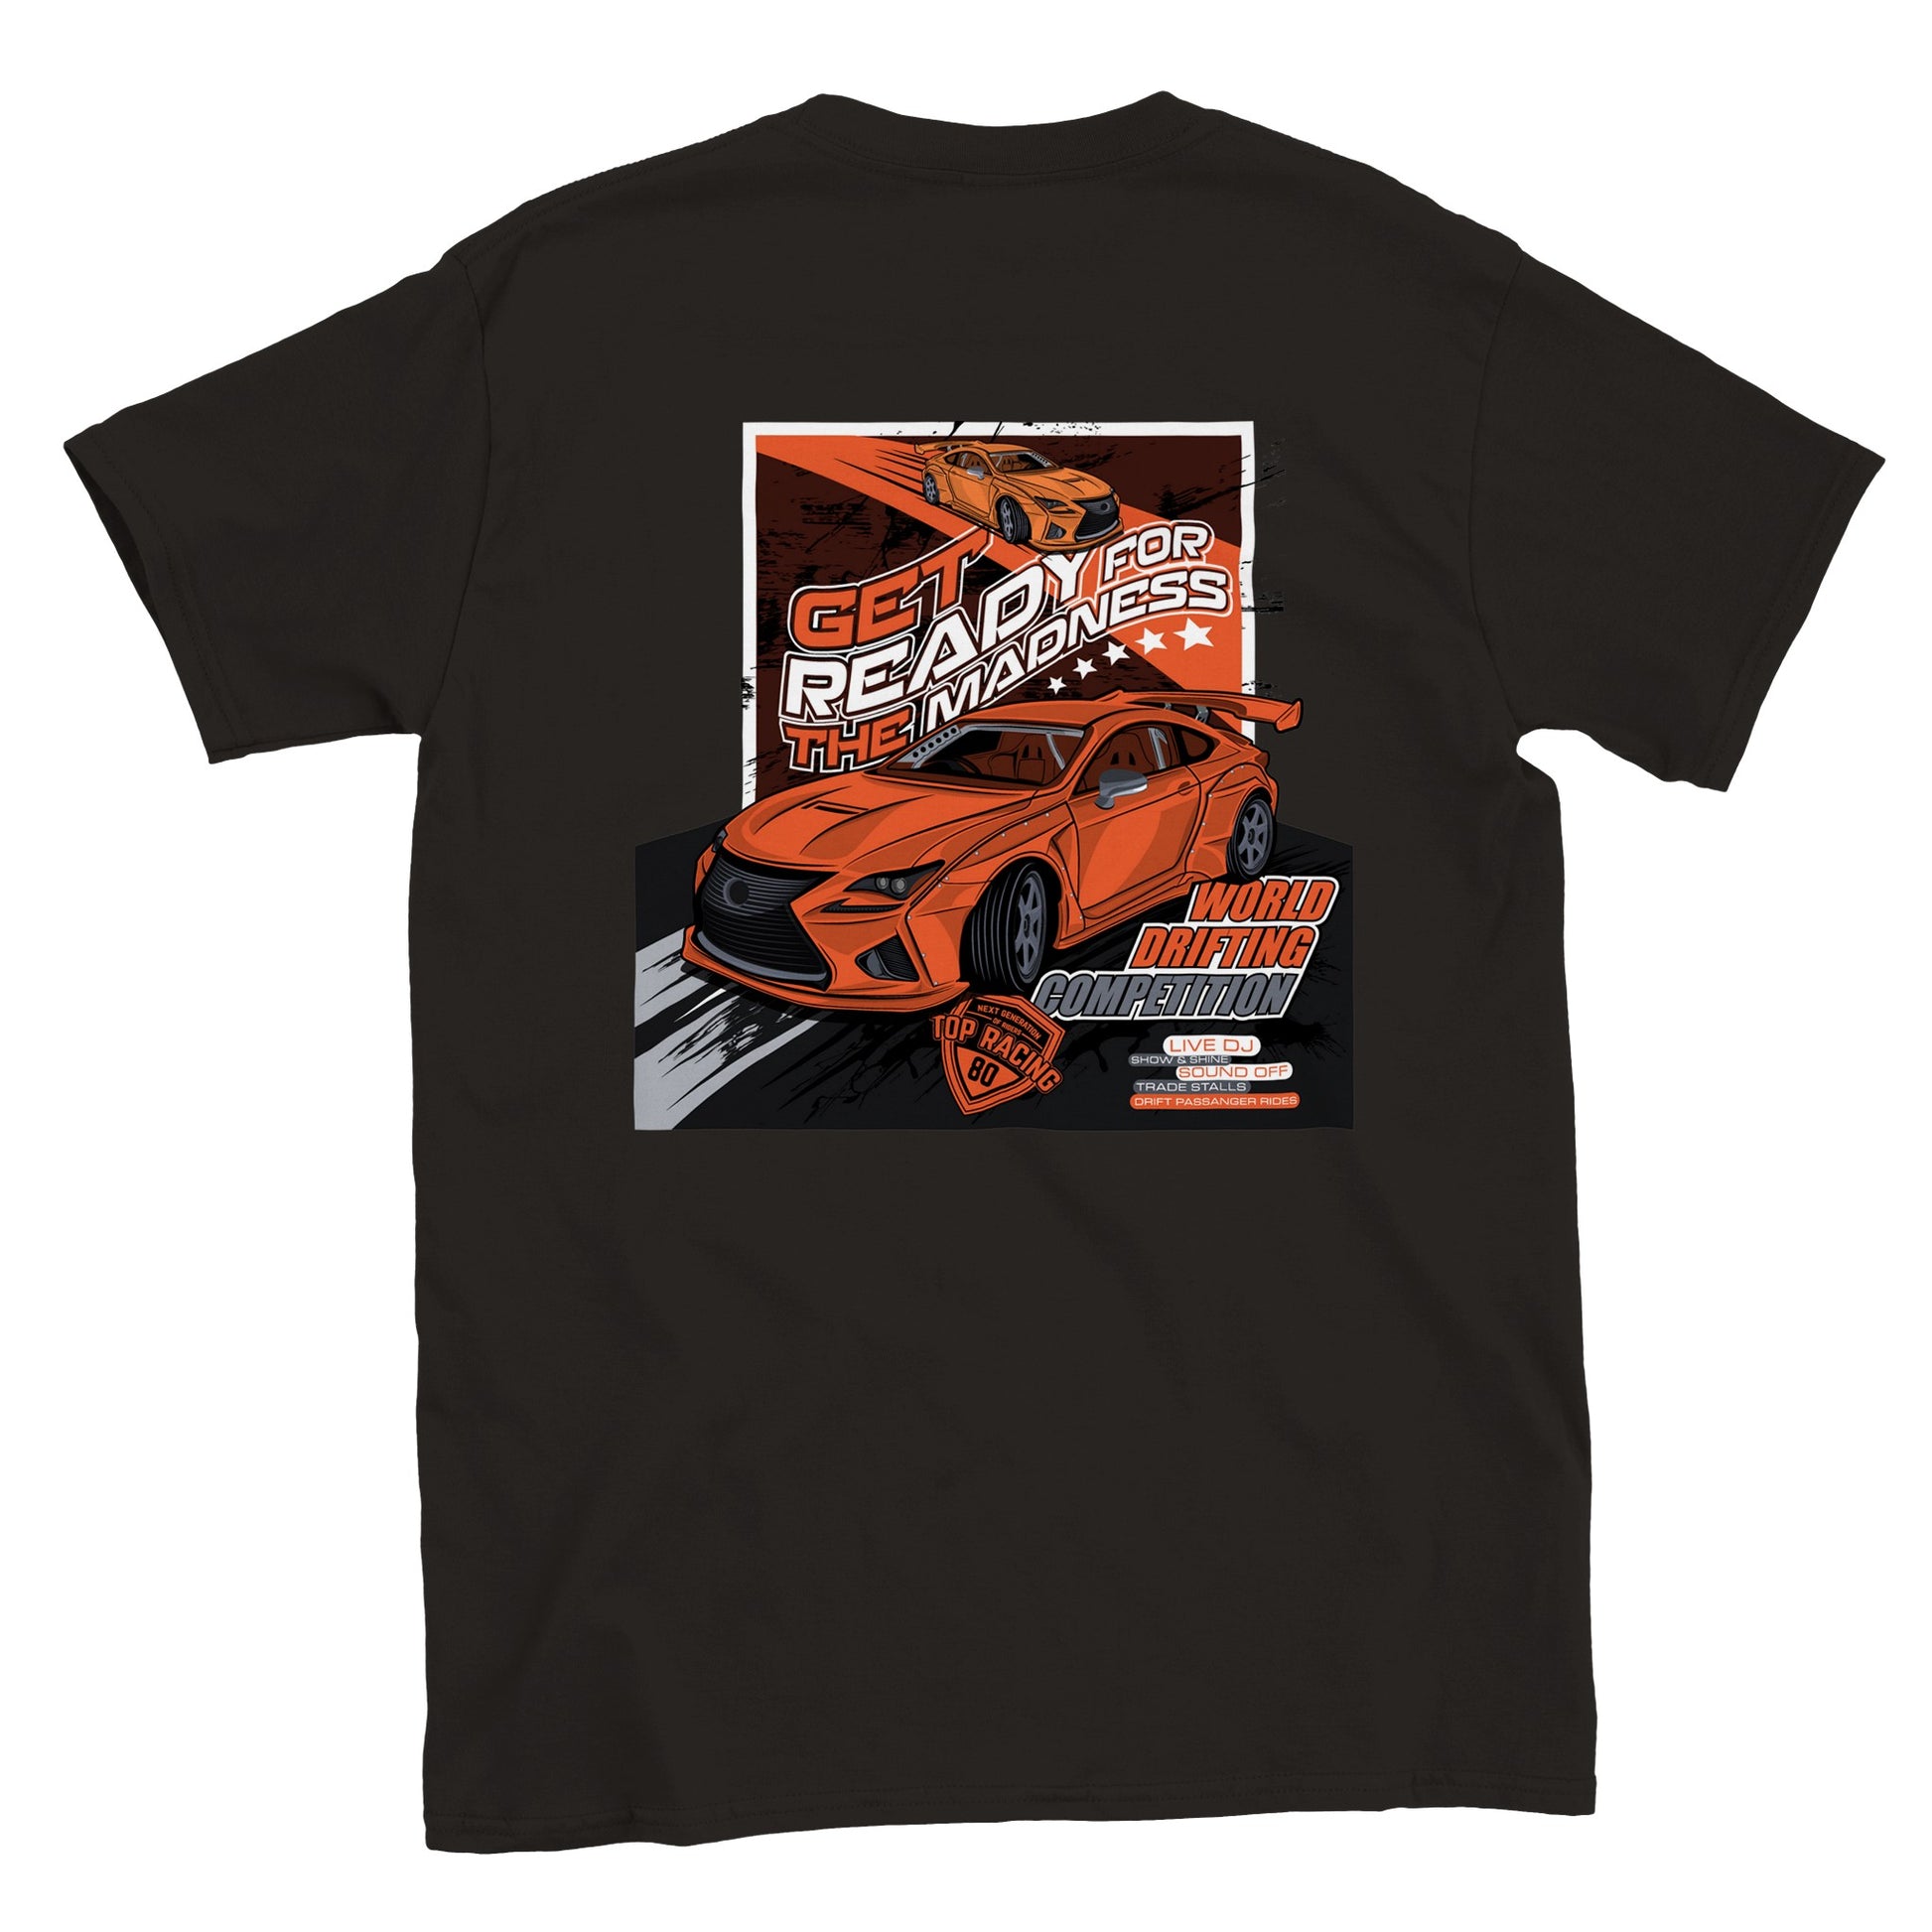 JDM - Get Ready for the Madness T-shirt - Mister Snarky's